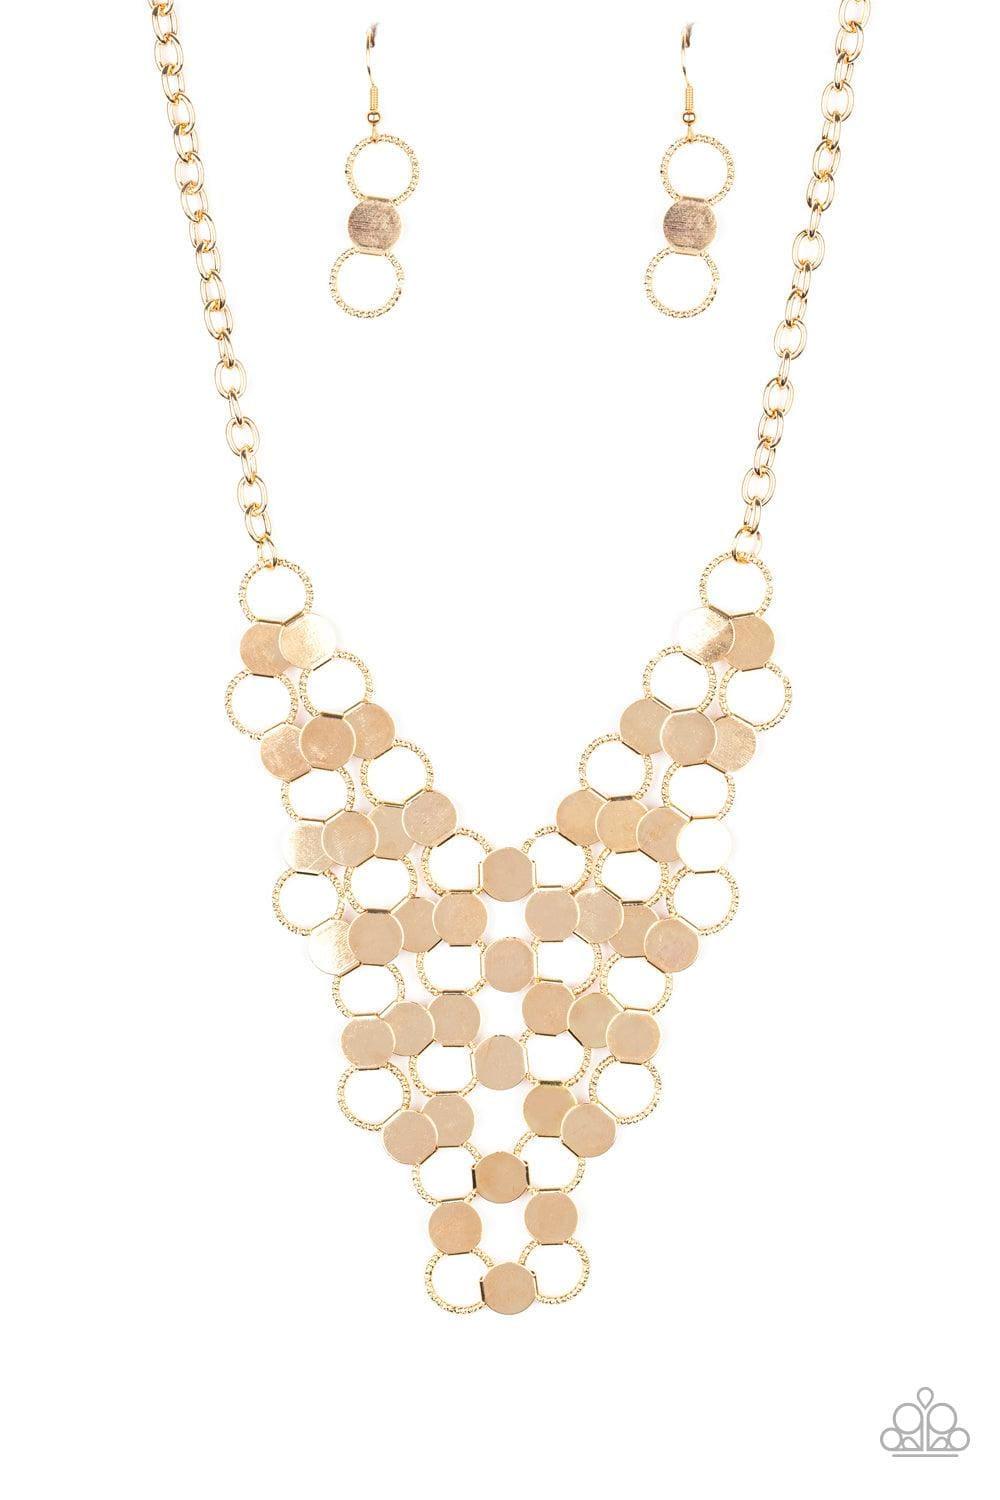 Paparazzi Accessories - Net Result - Gold Necklace - Bling by JessieK